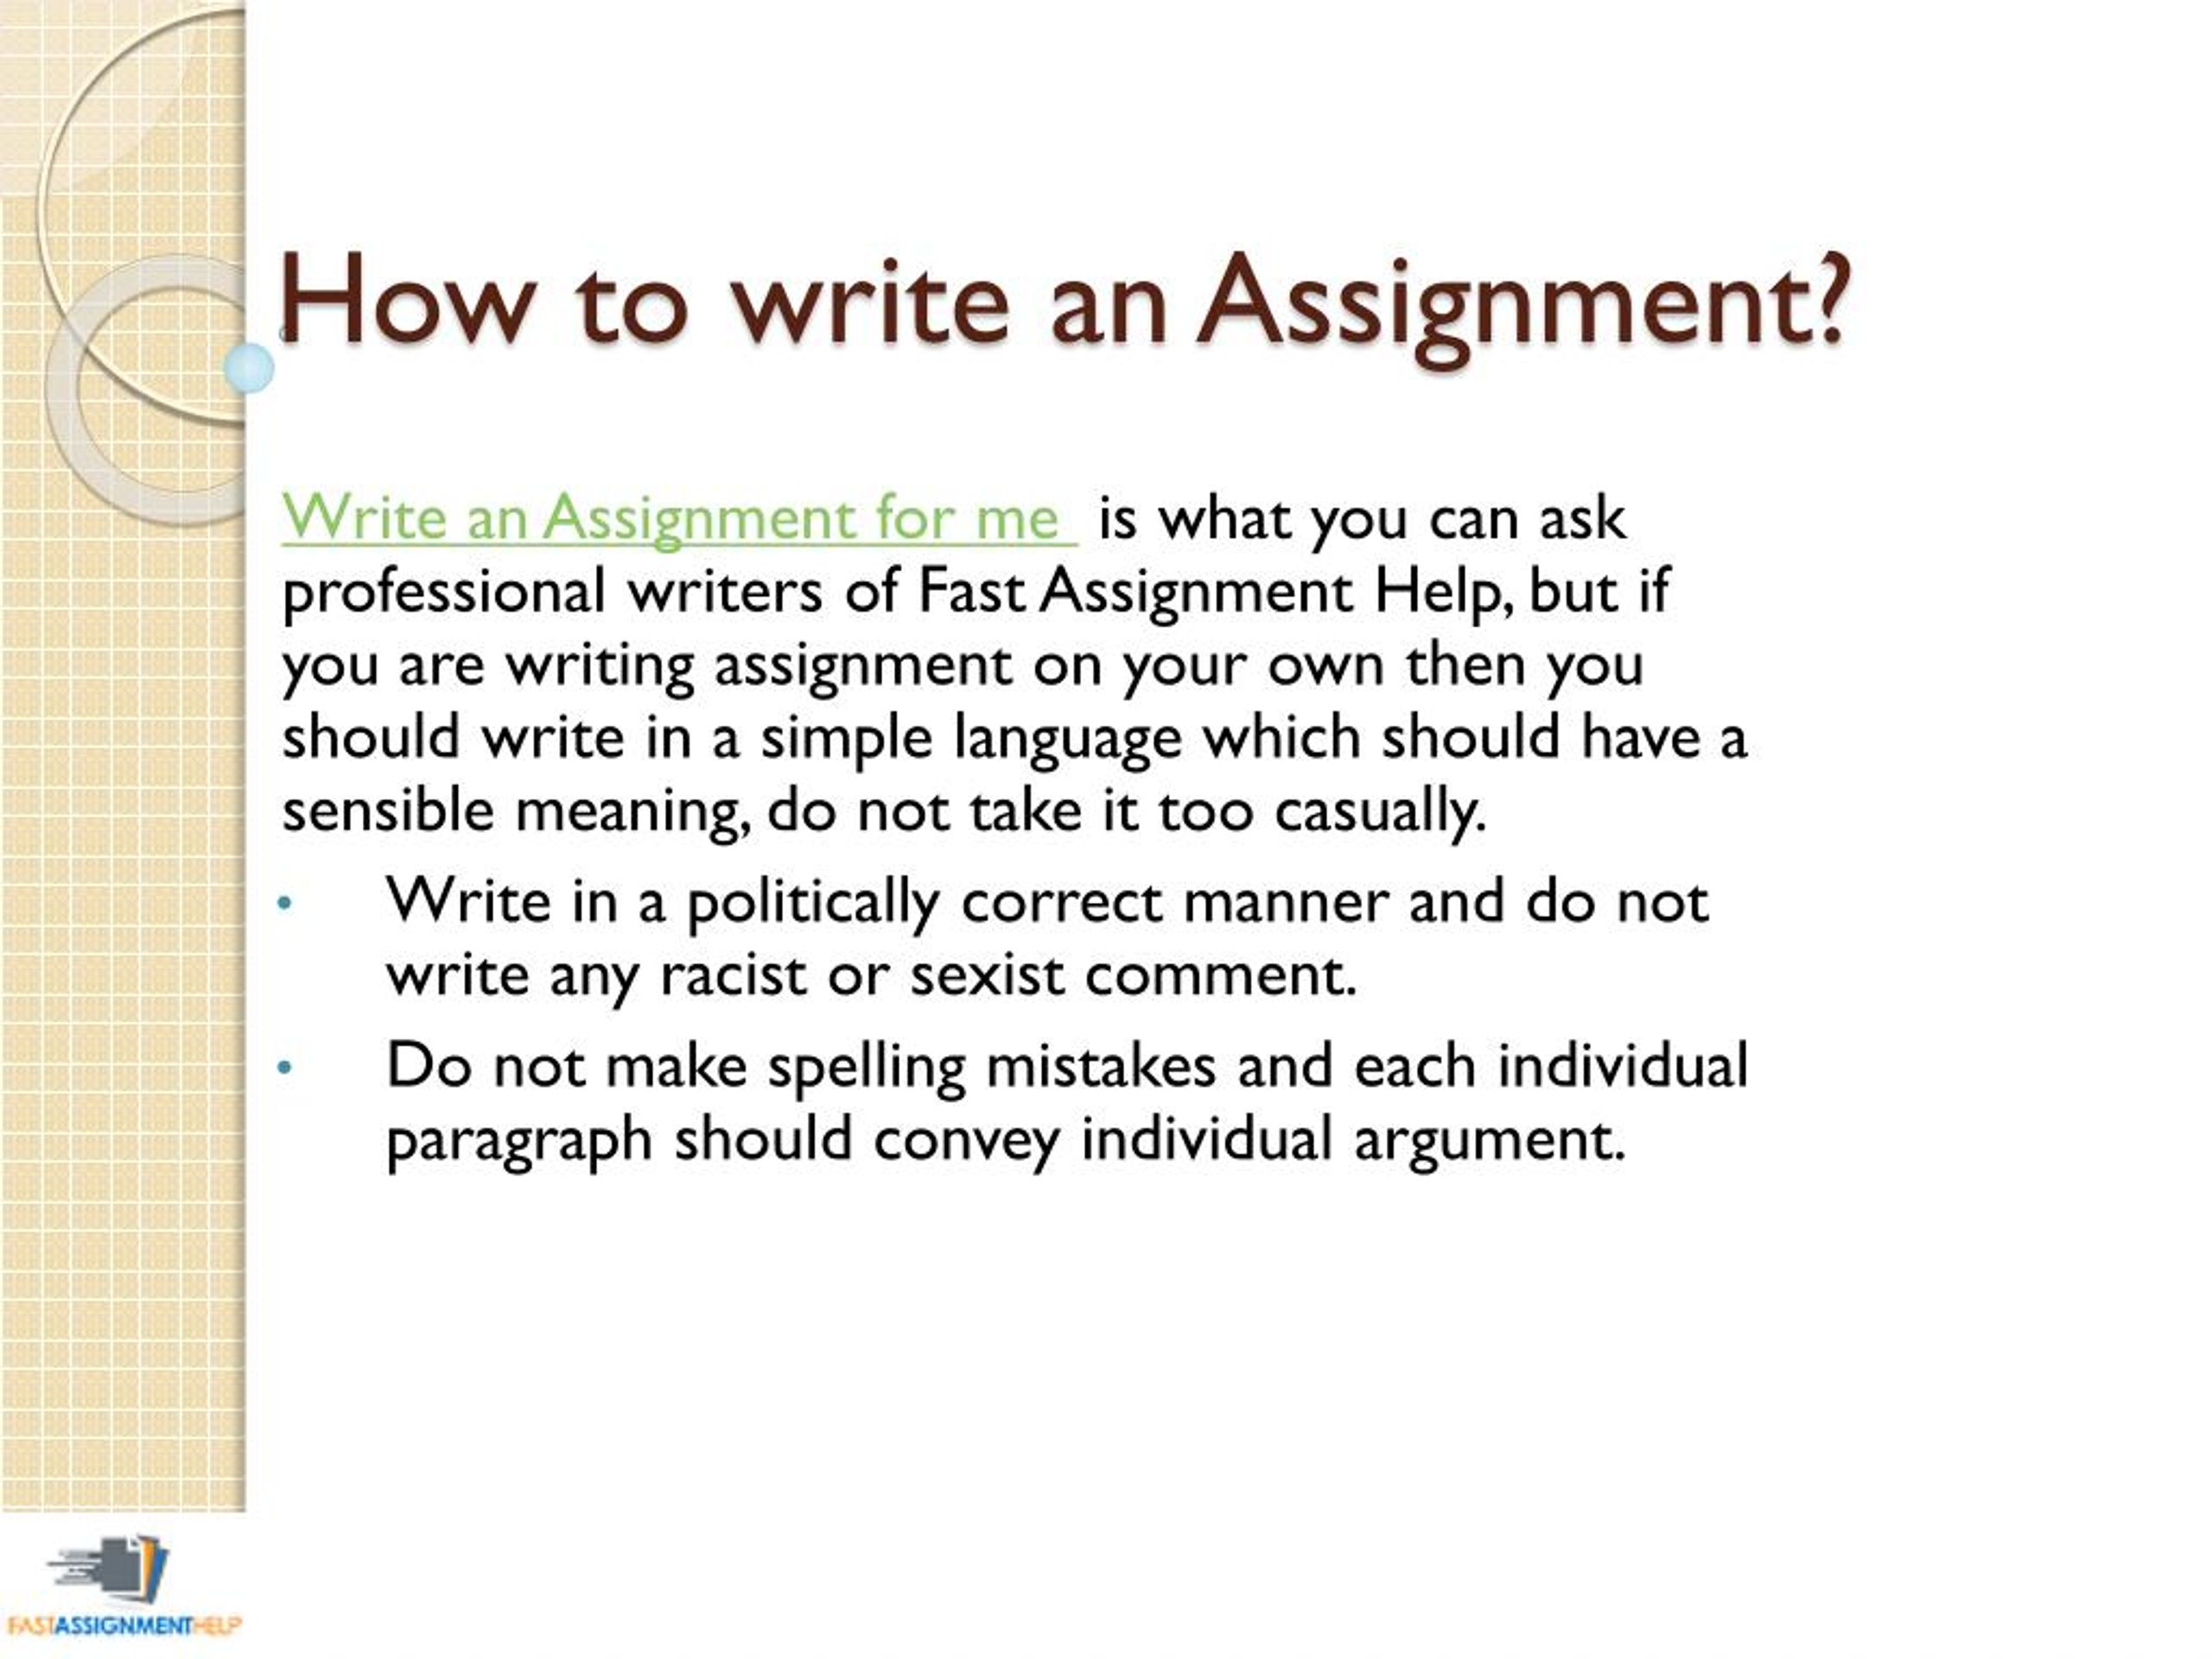 write an assignment for me